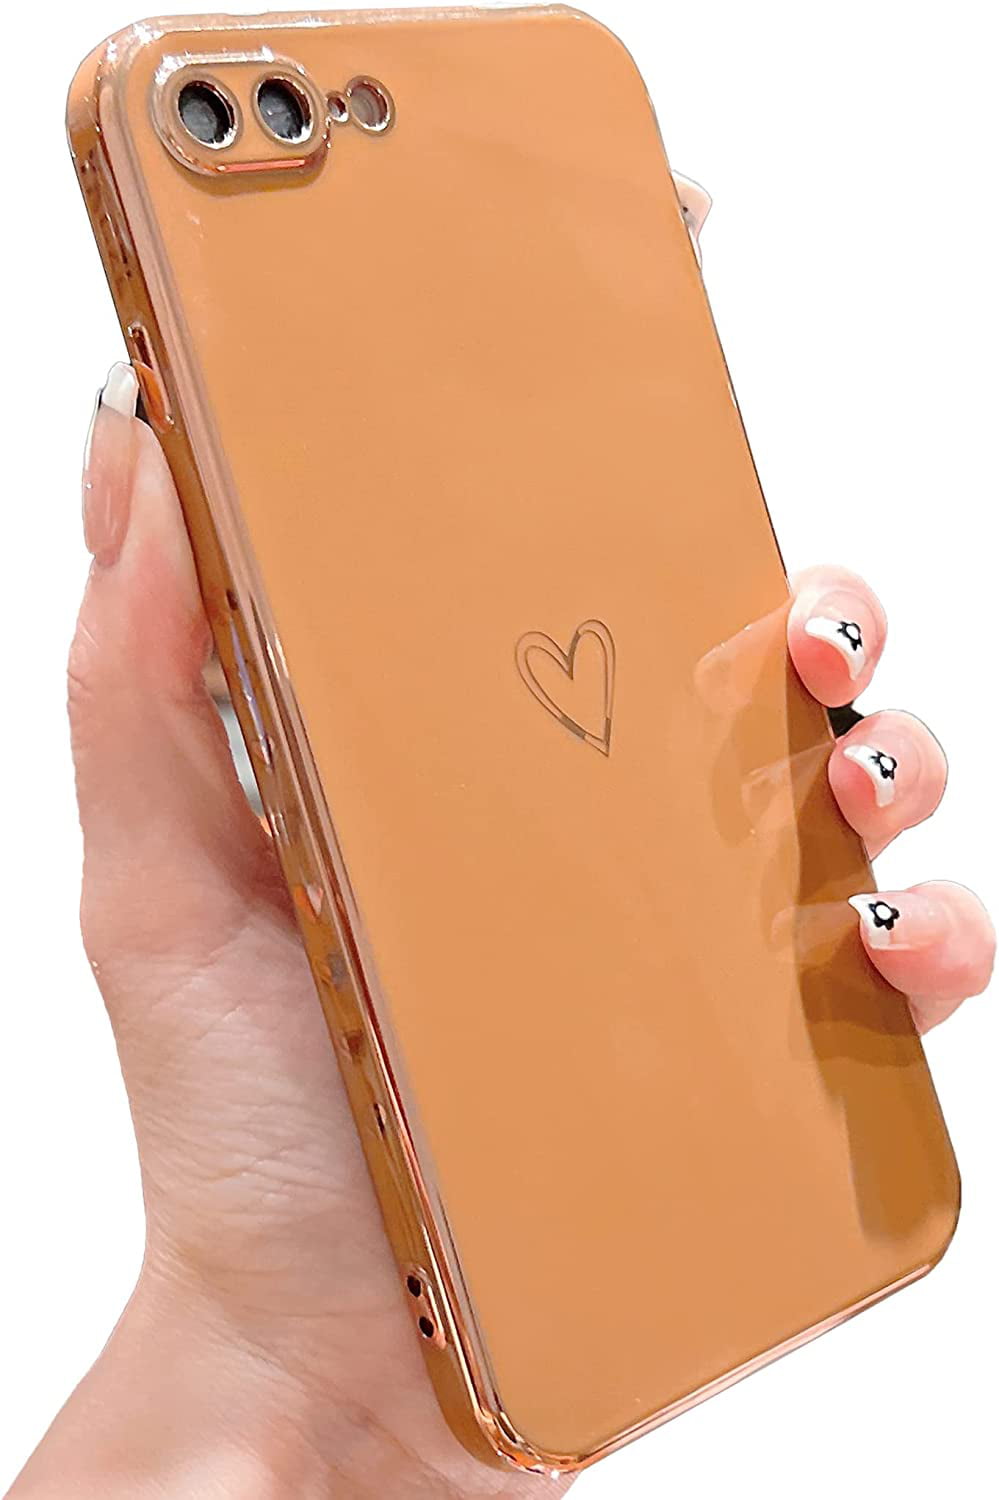 Kelier iPhone 8 Plus Case, Ultra Slim Flexible iPhone 7 Plus Matte Case,  Gold Plated 3 in 1 Shockproof Luxury Cover Case for iPhone 8 Plus/iPhone 7